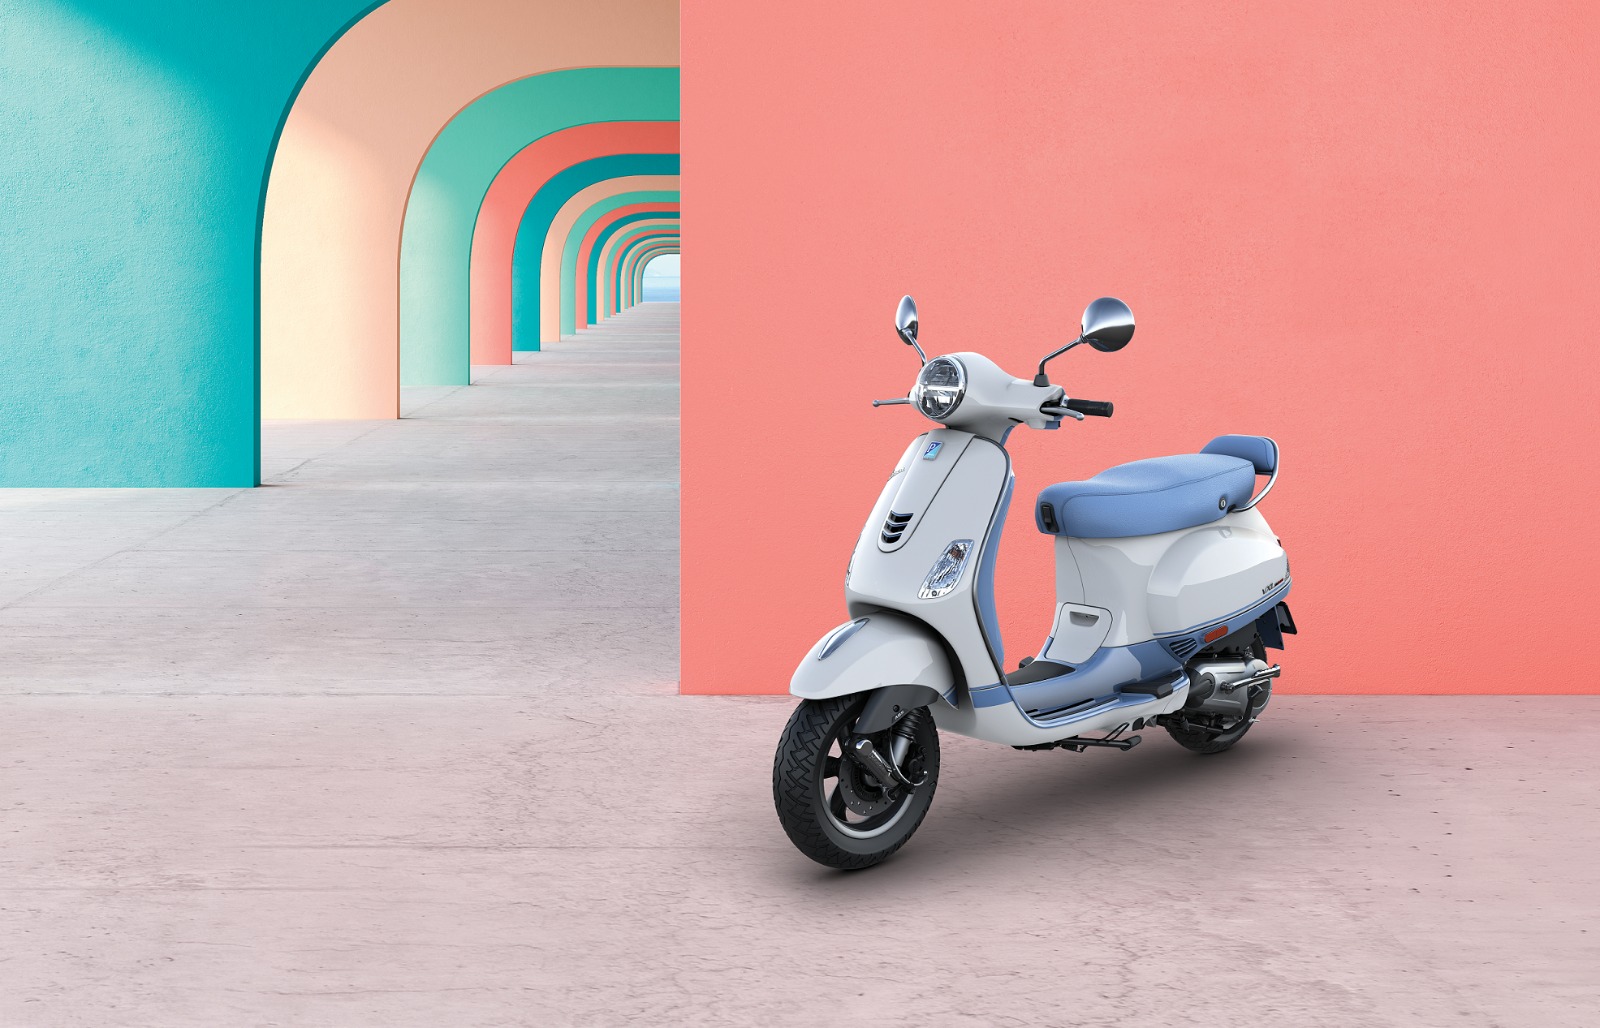 Aside from being OBD-II compliant, the Vespa Dual range remains largely the same mechanically